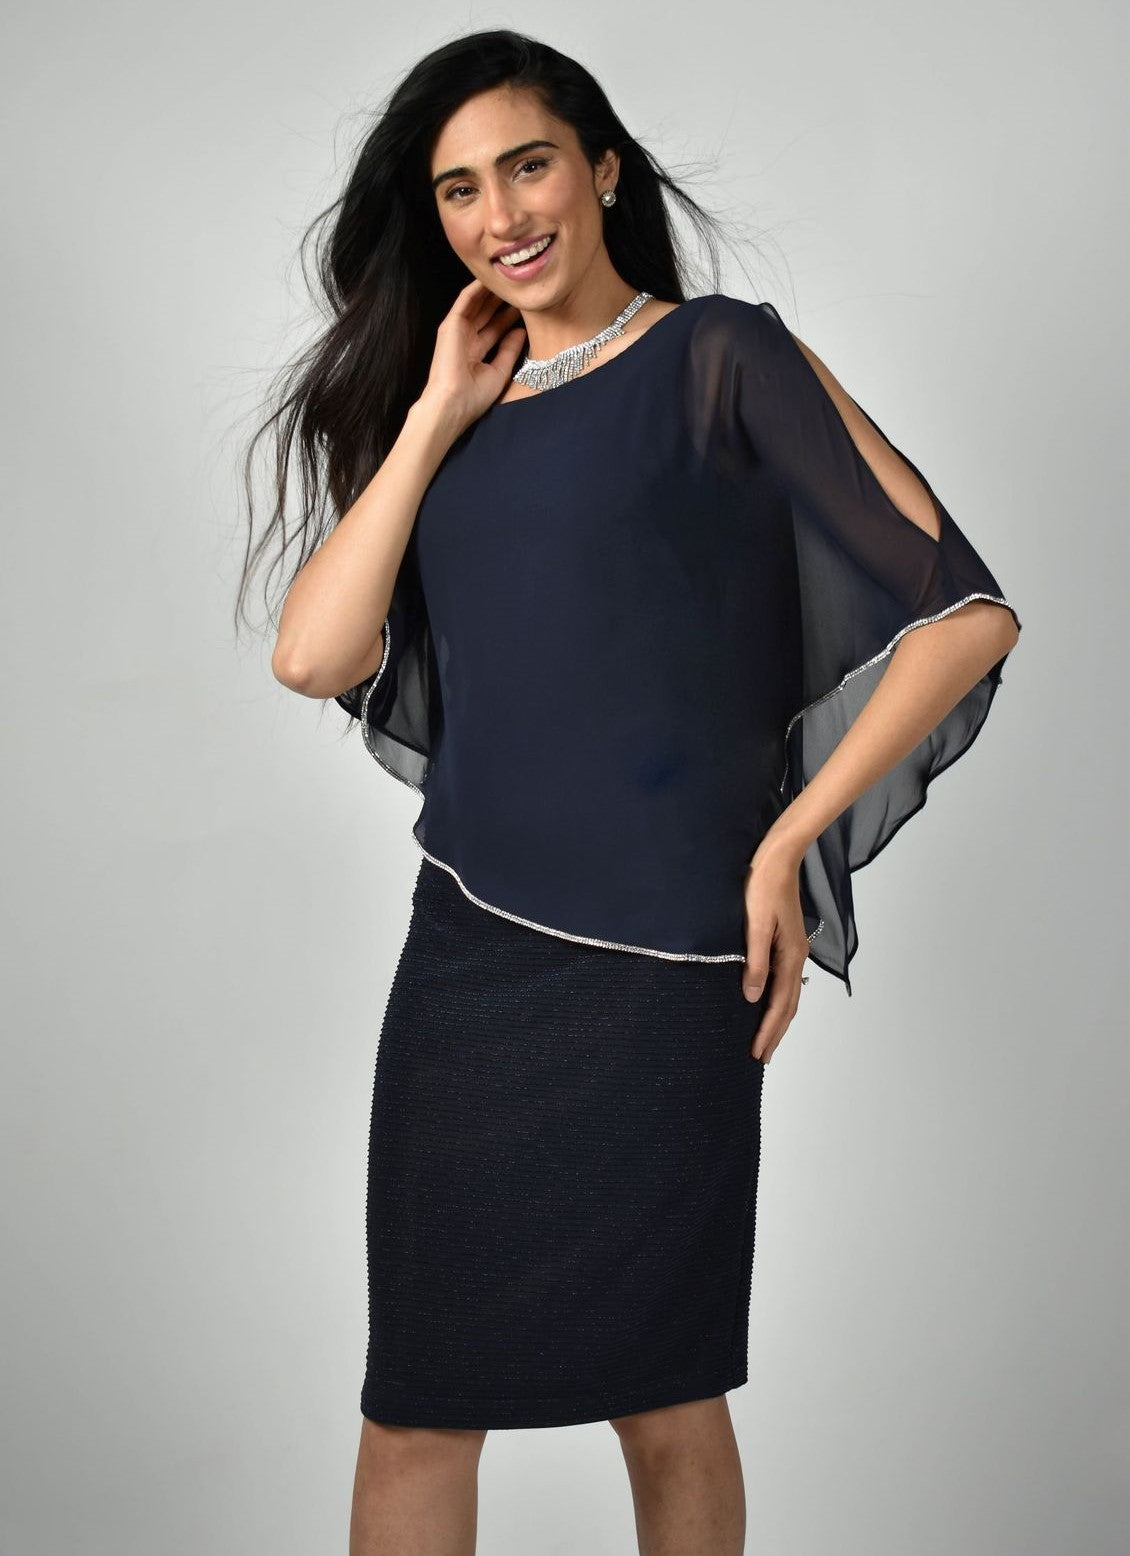 Shimmer Knit Dress with Chiffon Overlay